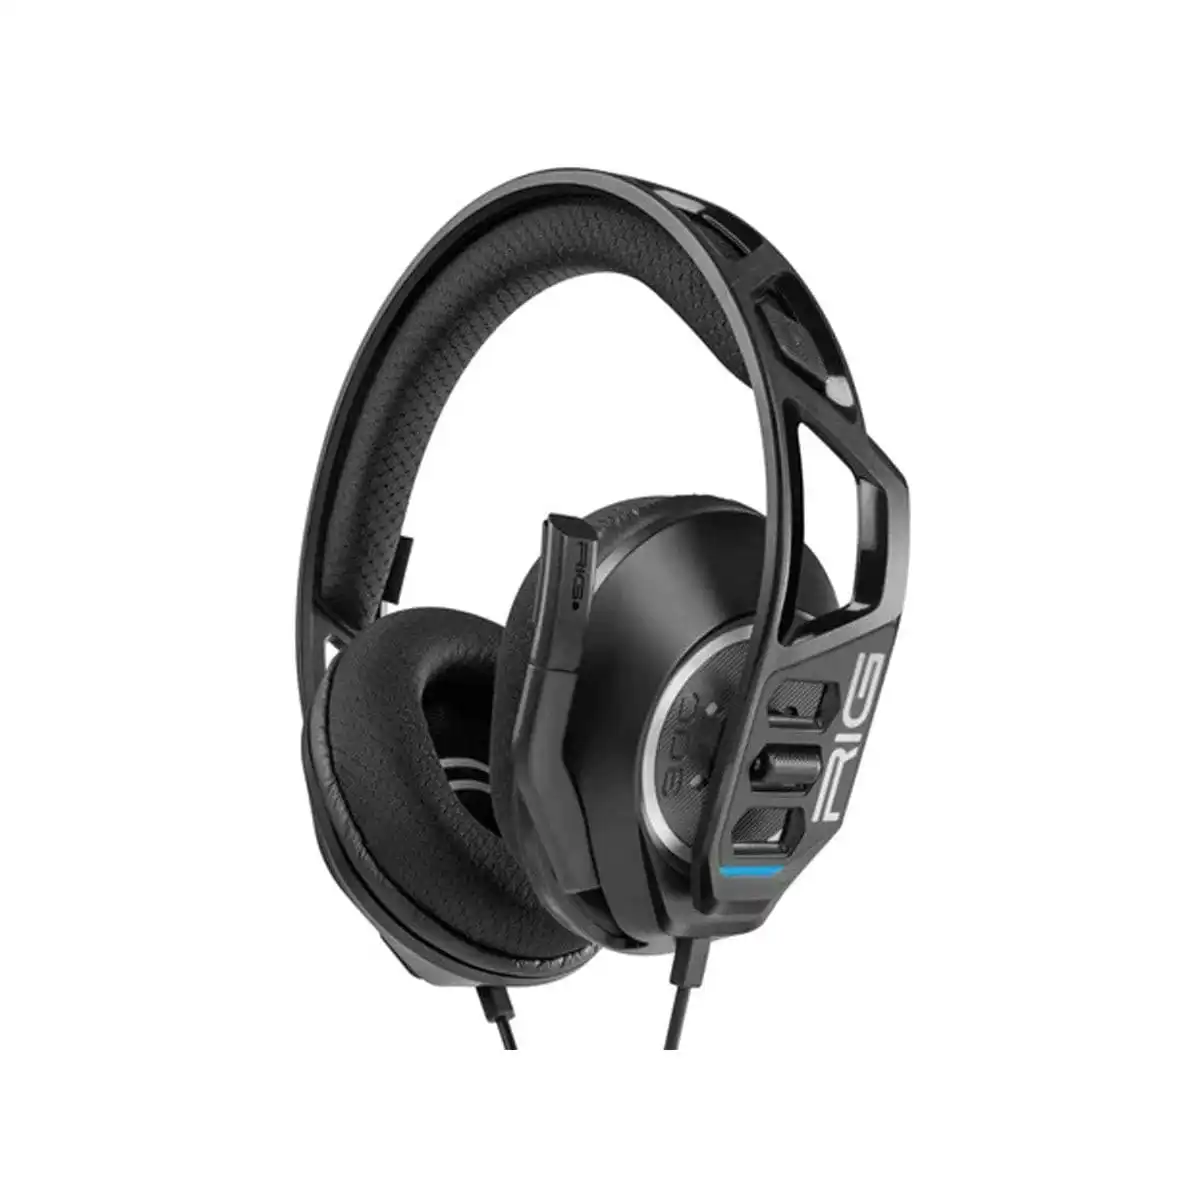 RIG 300 Pro HC Gaming Headset for PC - Black